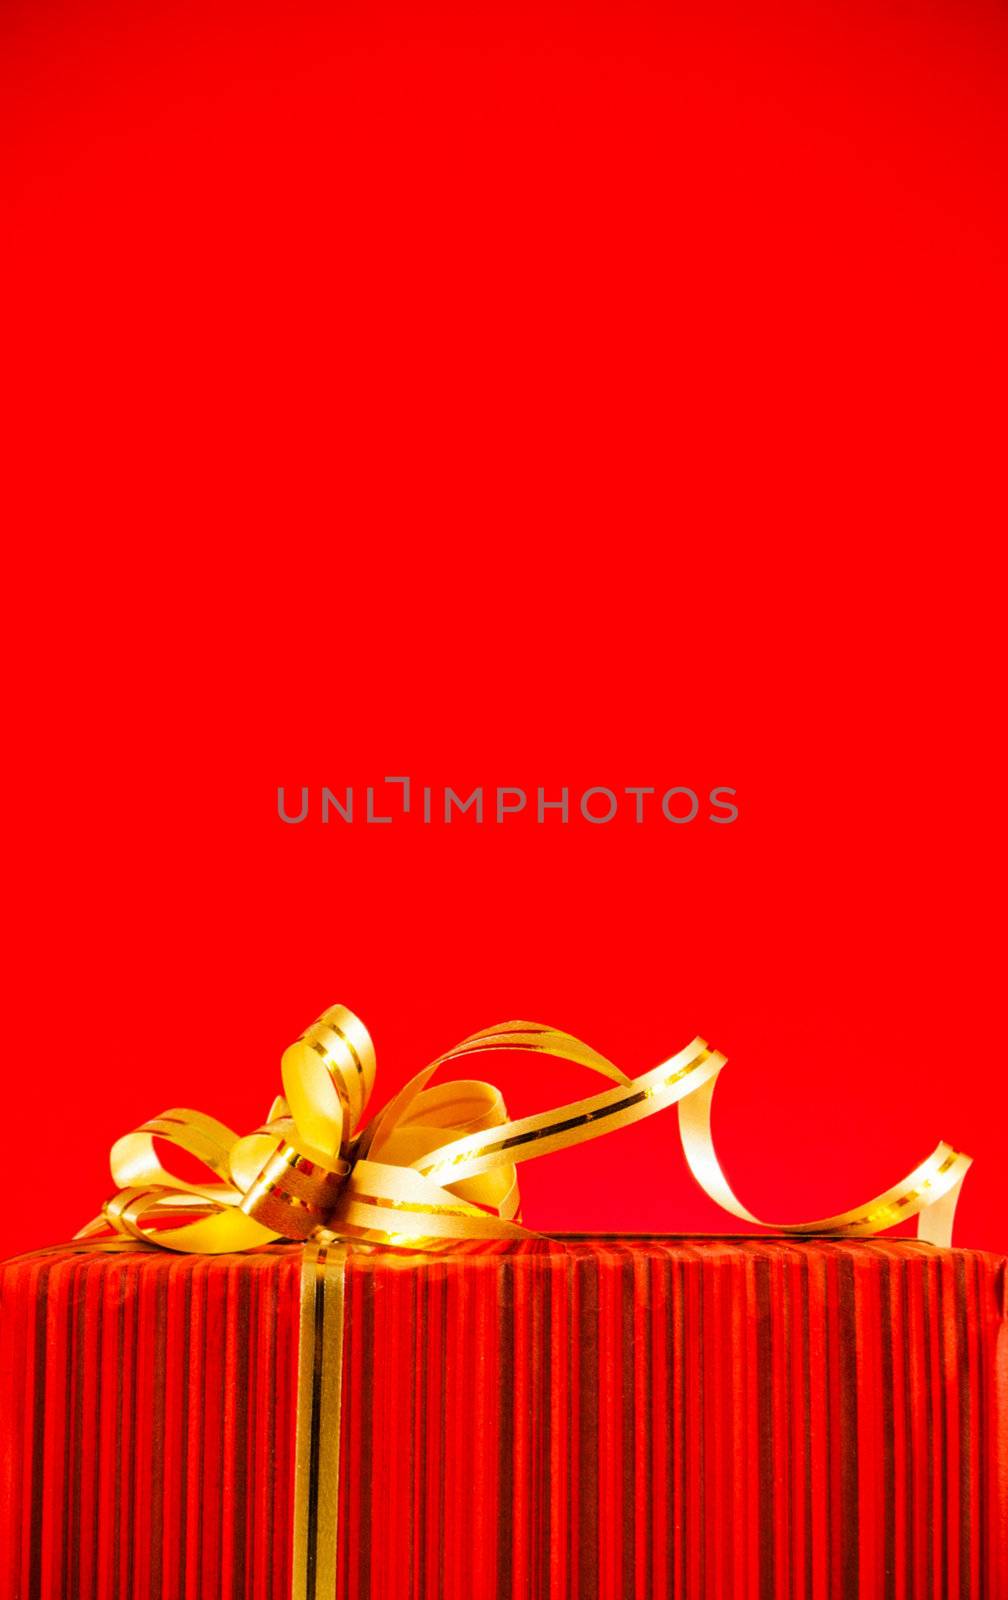 Wrapped box against red background